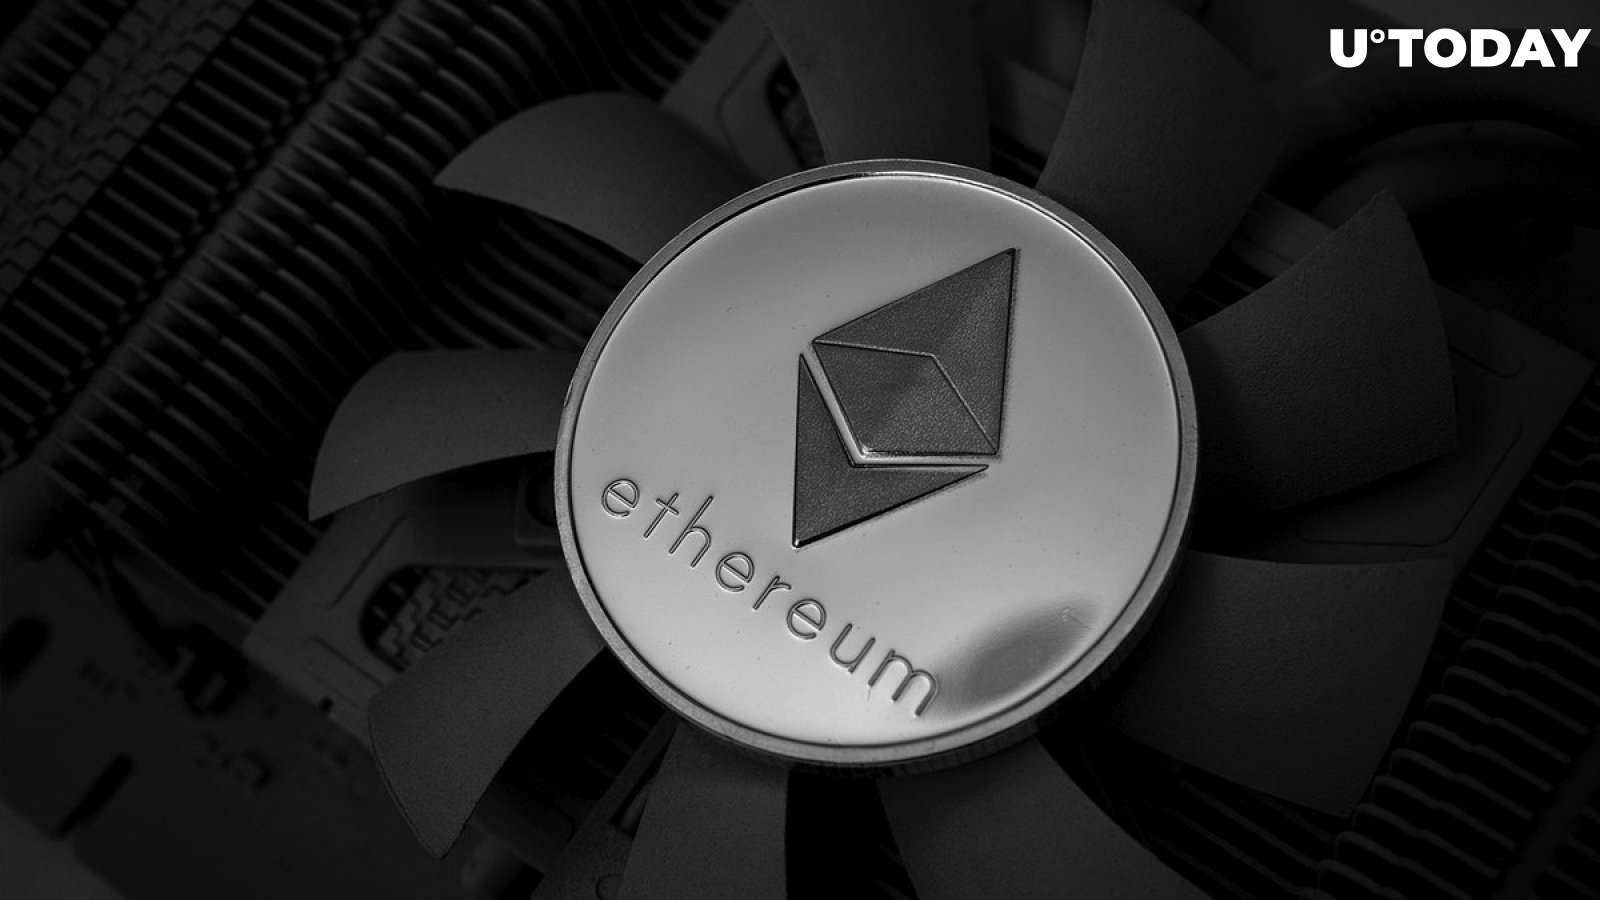 Another Ancient Ethereum Wallet Awakens After 7.3 Years, Here's How Much ETH It Holds